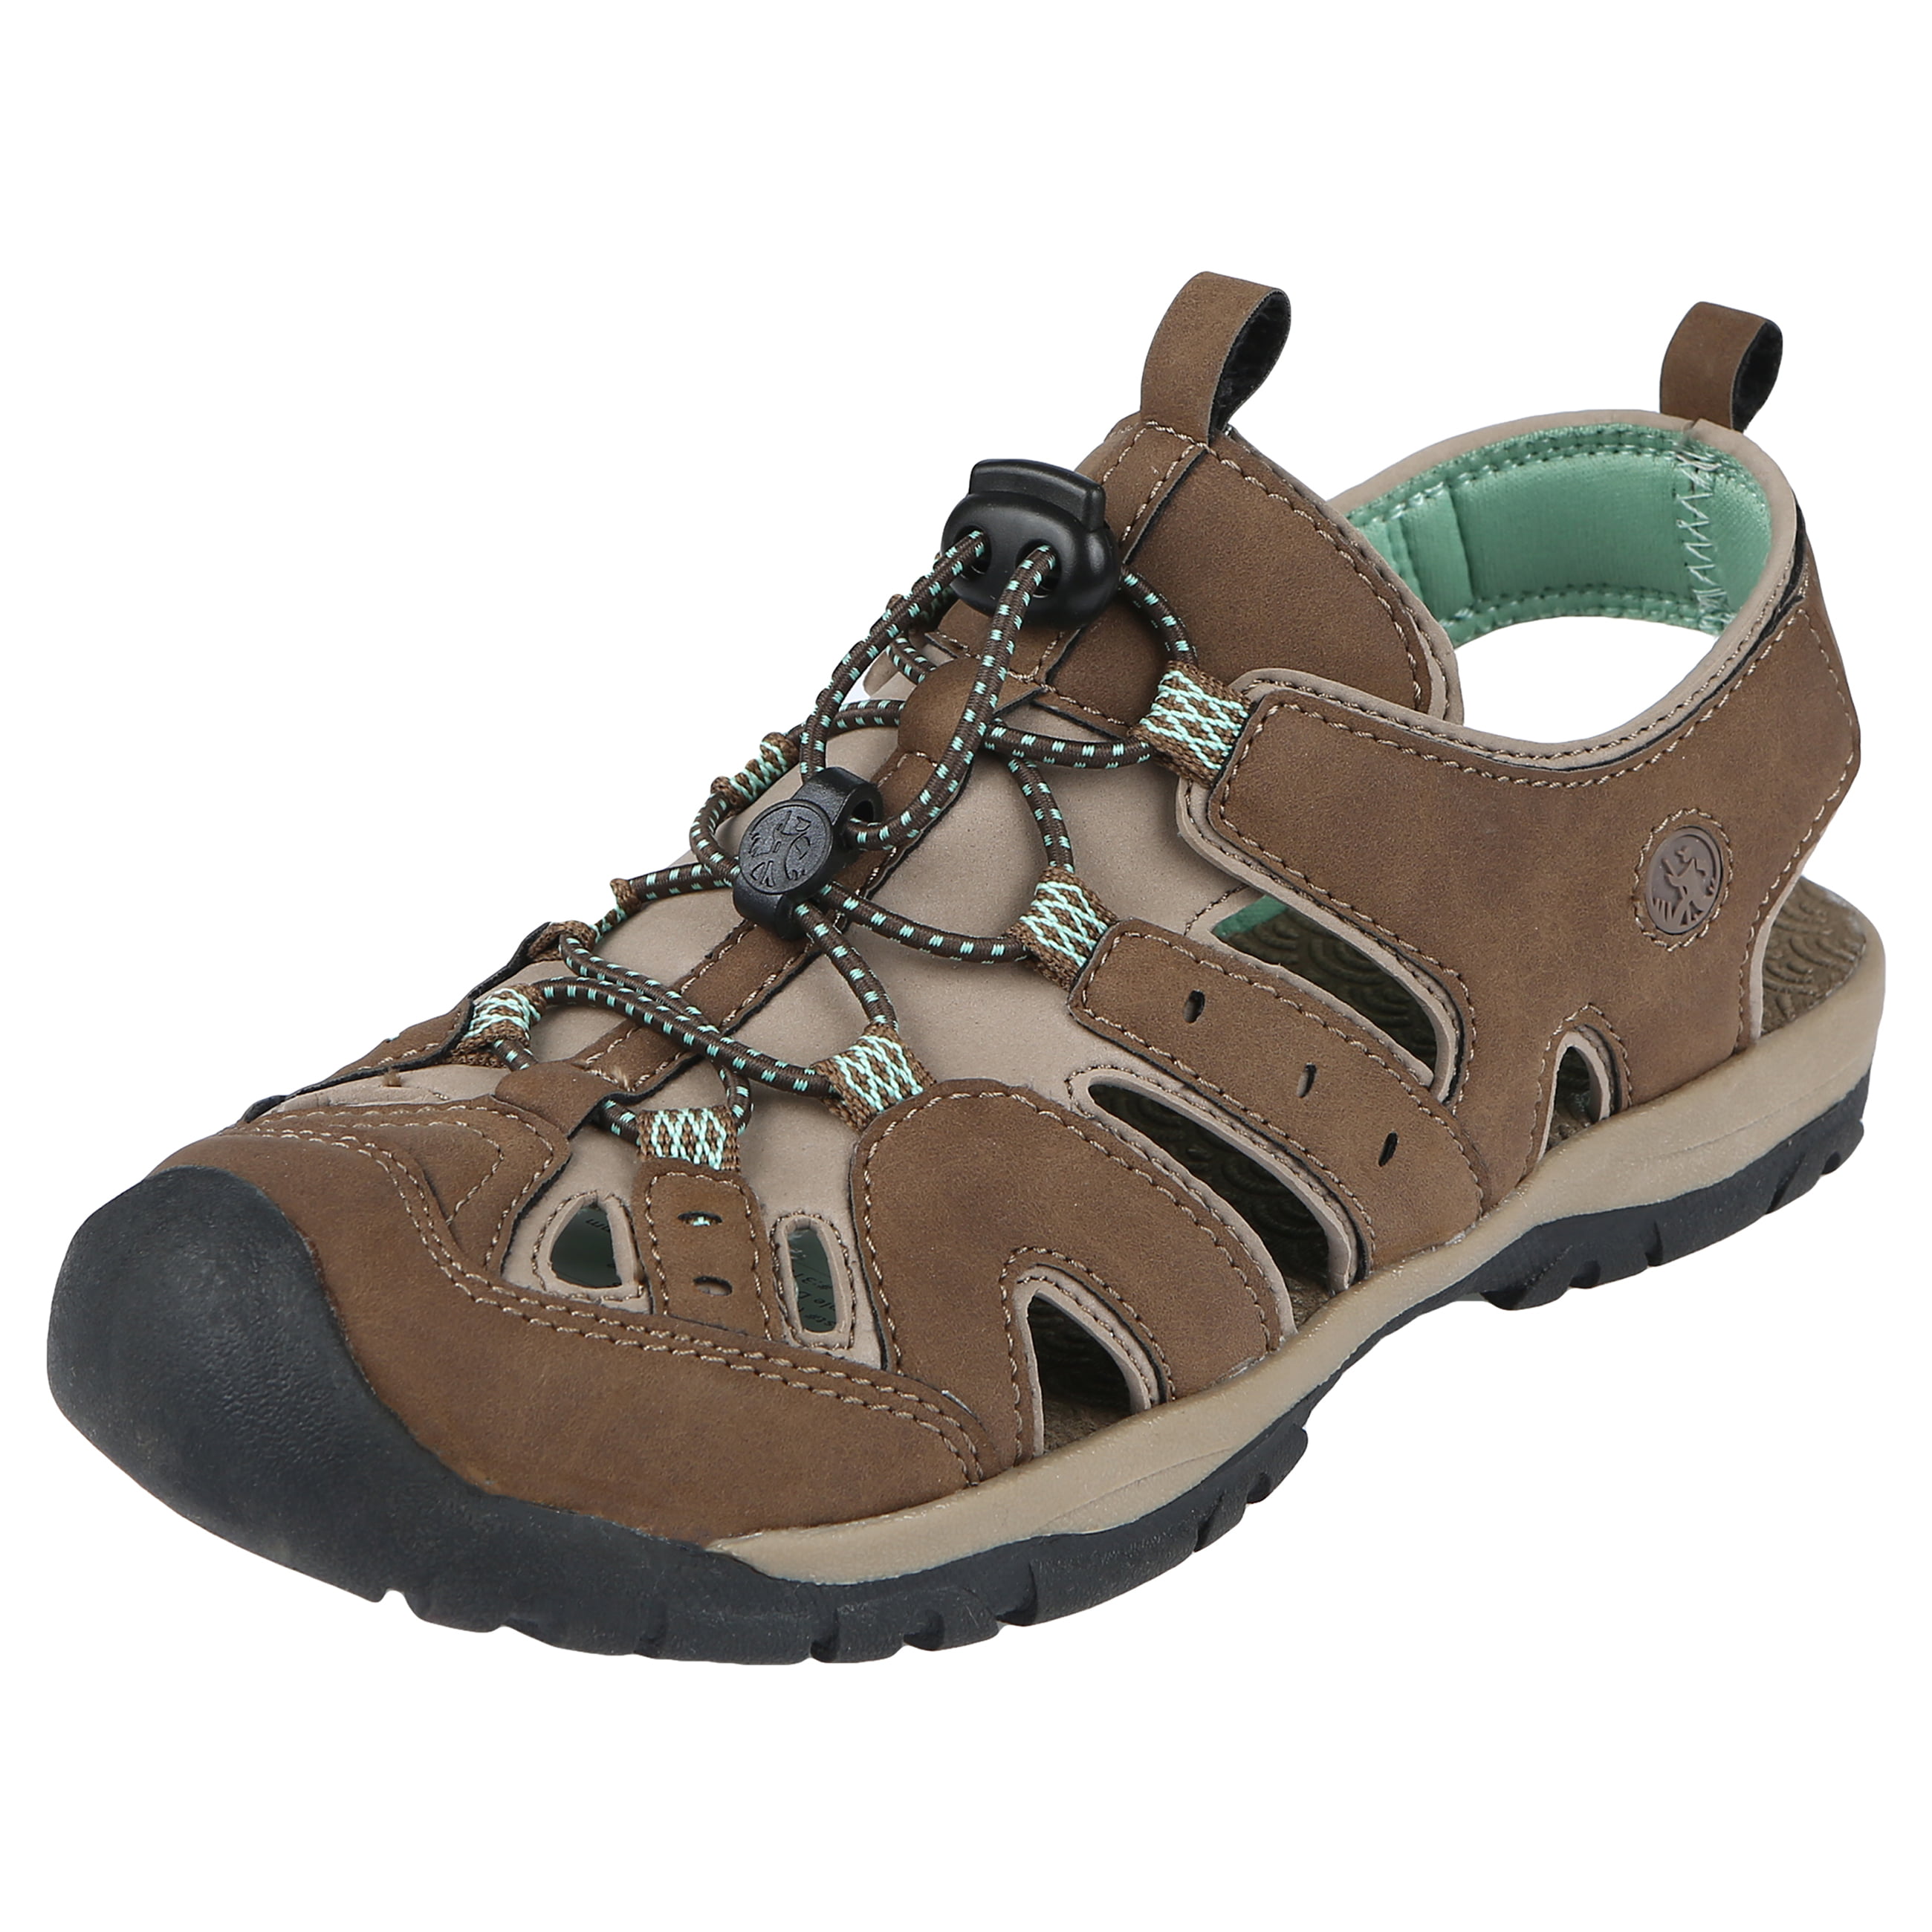 Womens Water Shoes Northside Burke II Sandals Water Shoes NEW 